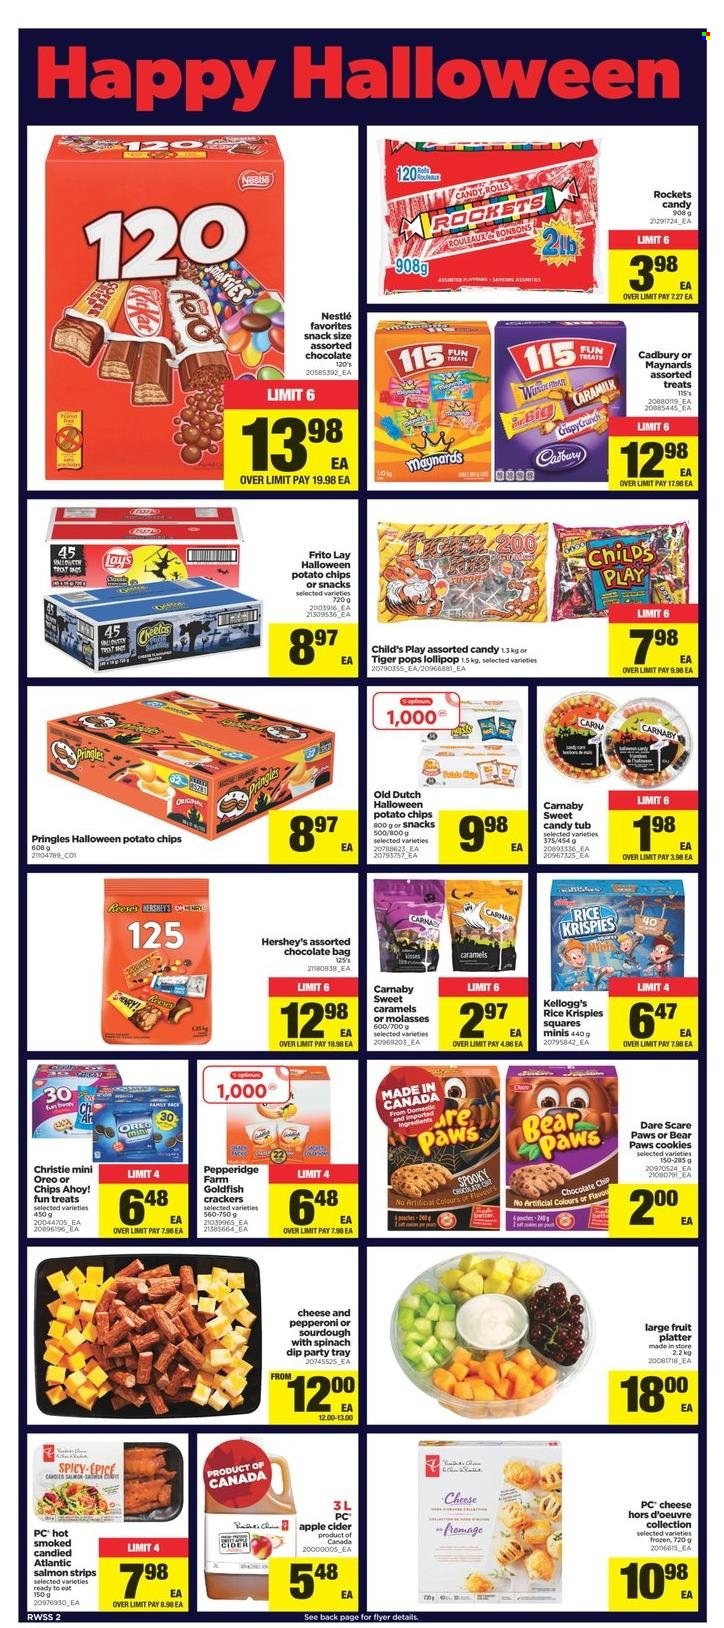 thumbnail - Real Canadian Superstore Flyer - October 22, 2021 - October 28, 2021 - Sales products - salmon, pepperoni, cheese, dip, spinach dip, Hershey's, strips, cookies, chocolate, crackers, lollipop, Kellogg's, Cadbury, Chips Ahoy!, potato chips, Pringles, Cheetos, Lay’s, Goldfish, Rice Krispies, molasses, apple cider, cider, nappies, Paws, Halloween, Nestlé. Page 2.